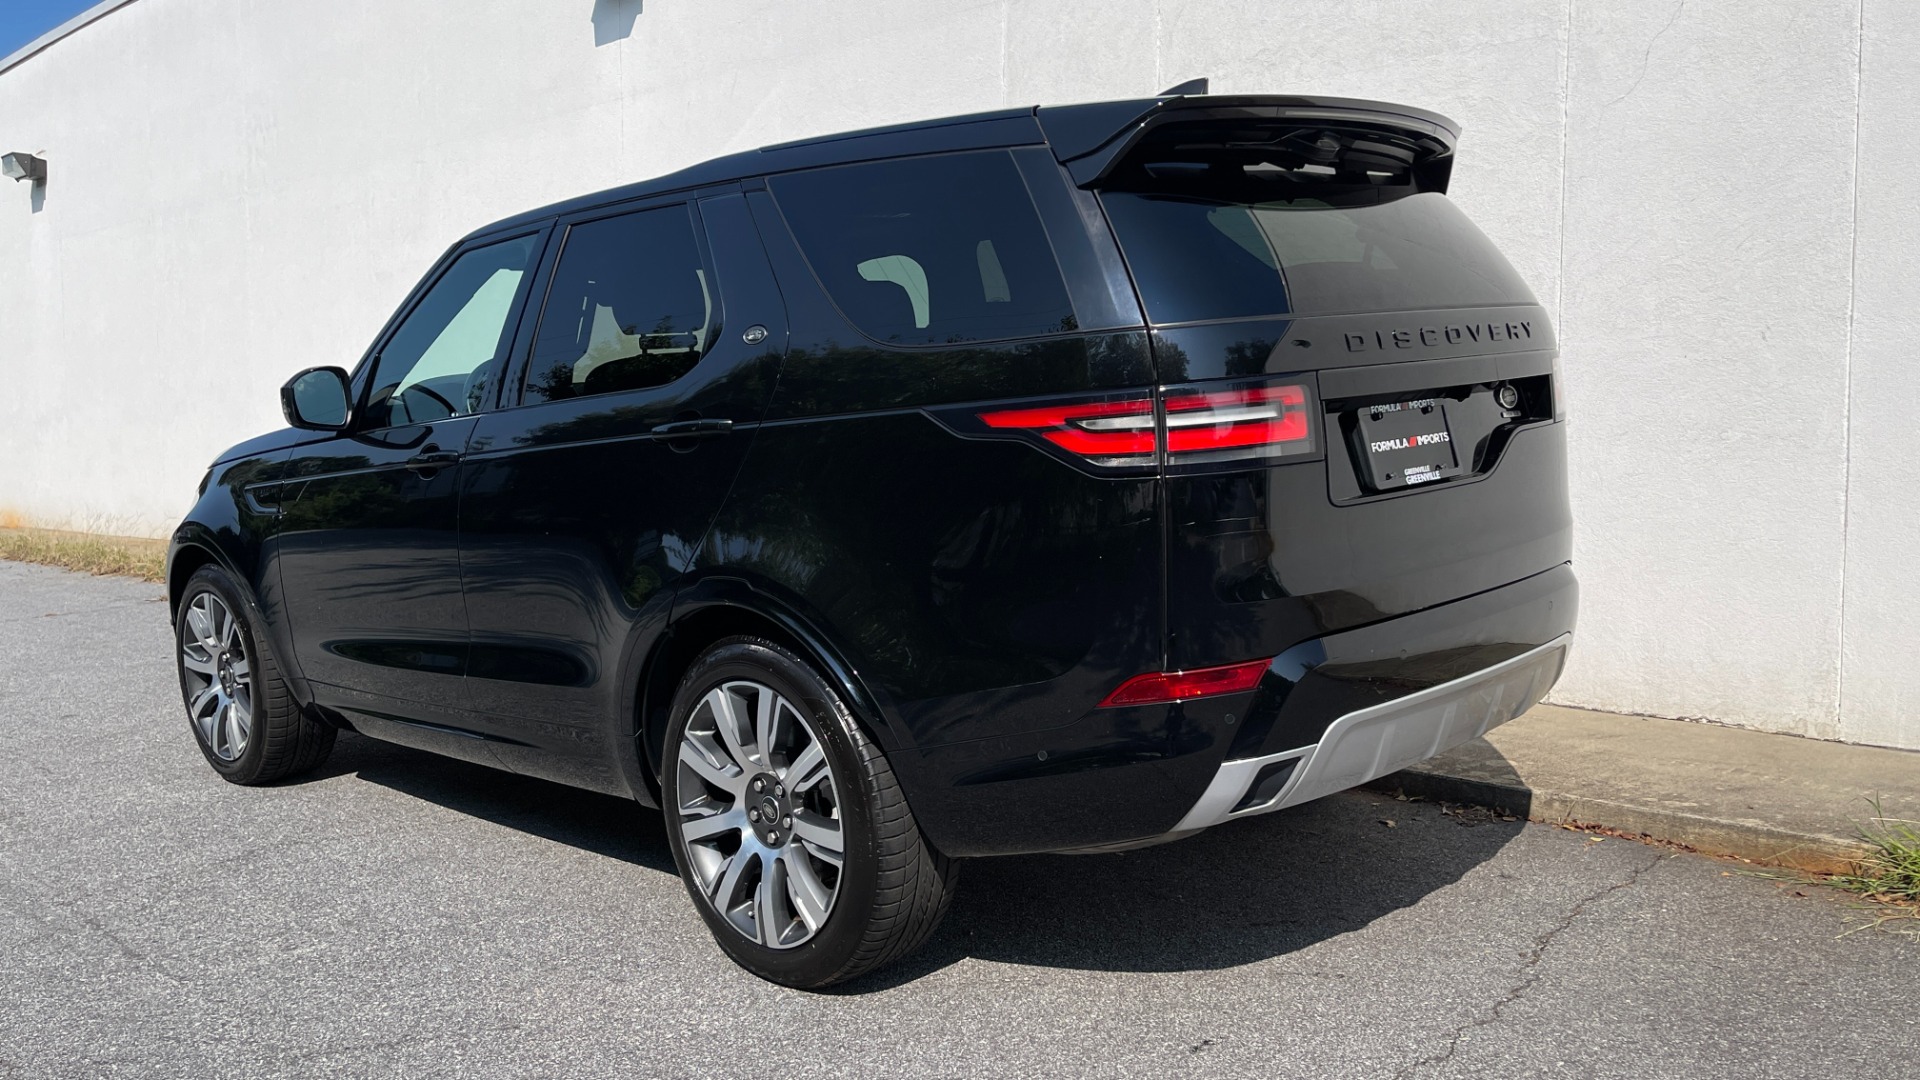 Used 2019 Land Rover Discovery HSE / SEVEN SEAT / DYNAMIC PACKAGE / 21IN WHEELS / REMOTE SEAT PACKAGE for sale $36,500 at Formula Imports in Charlotte NC 28227 8